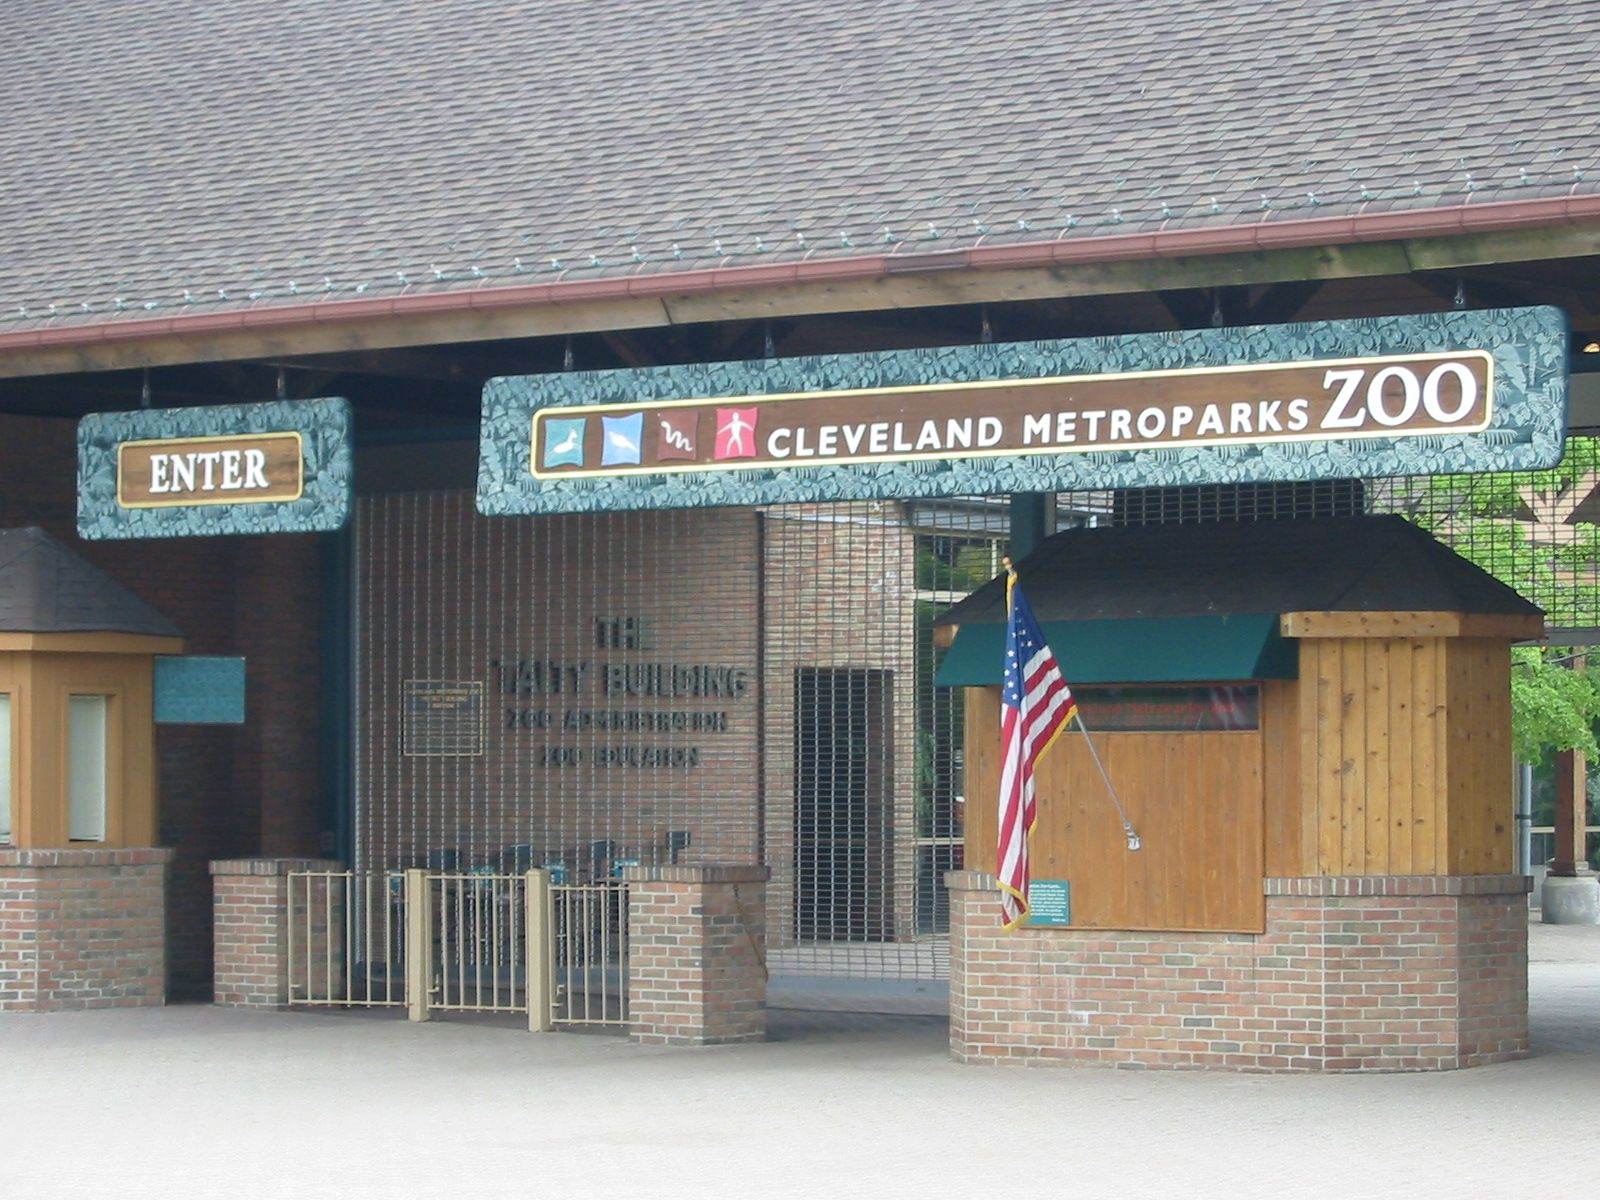 19-intriguing-facts-about-cleveland-metroparks-zoo